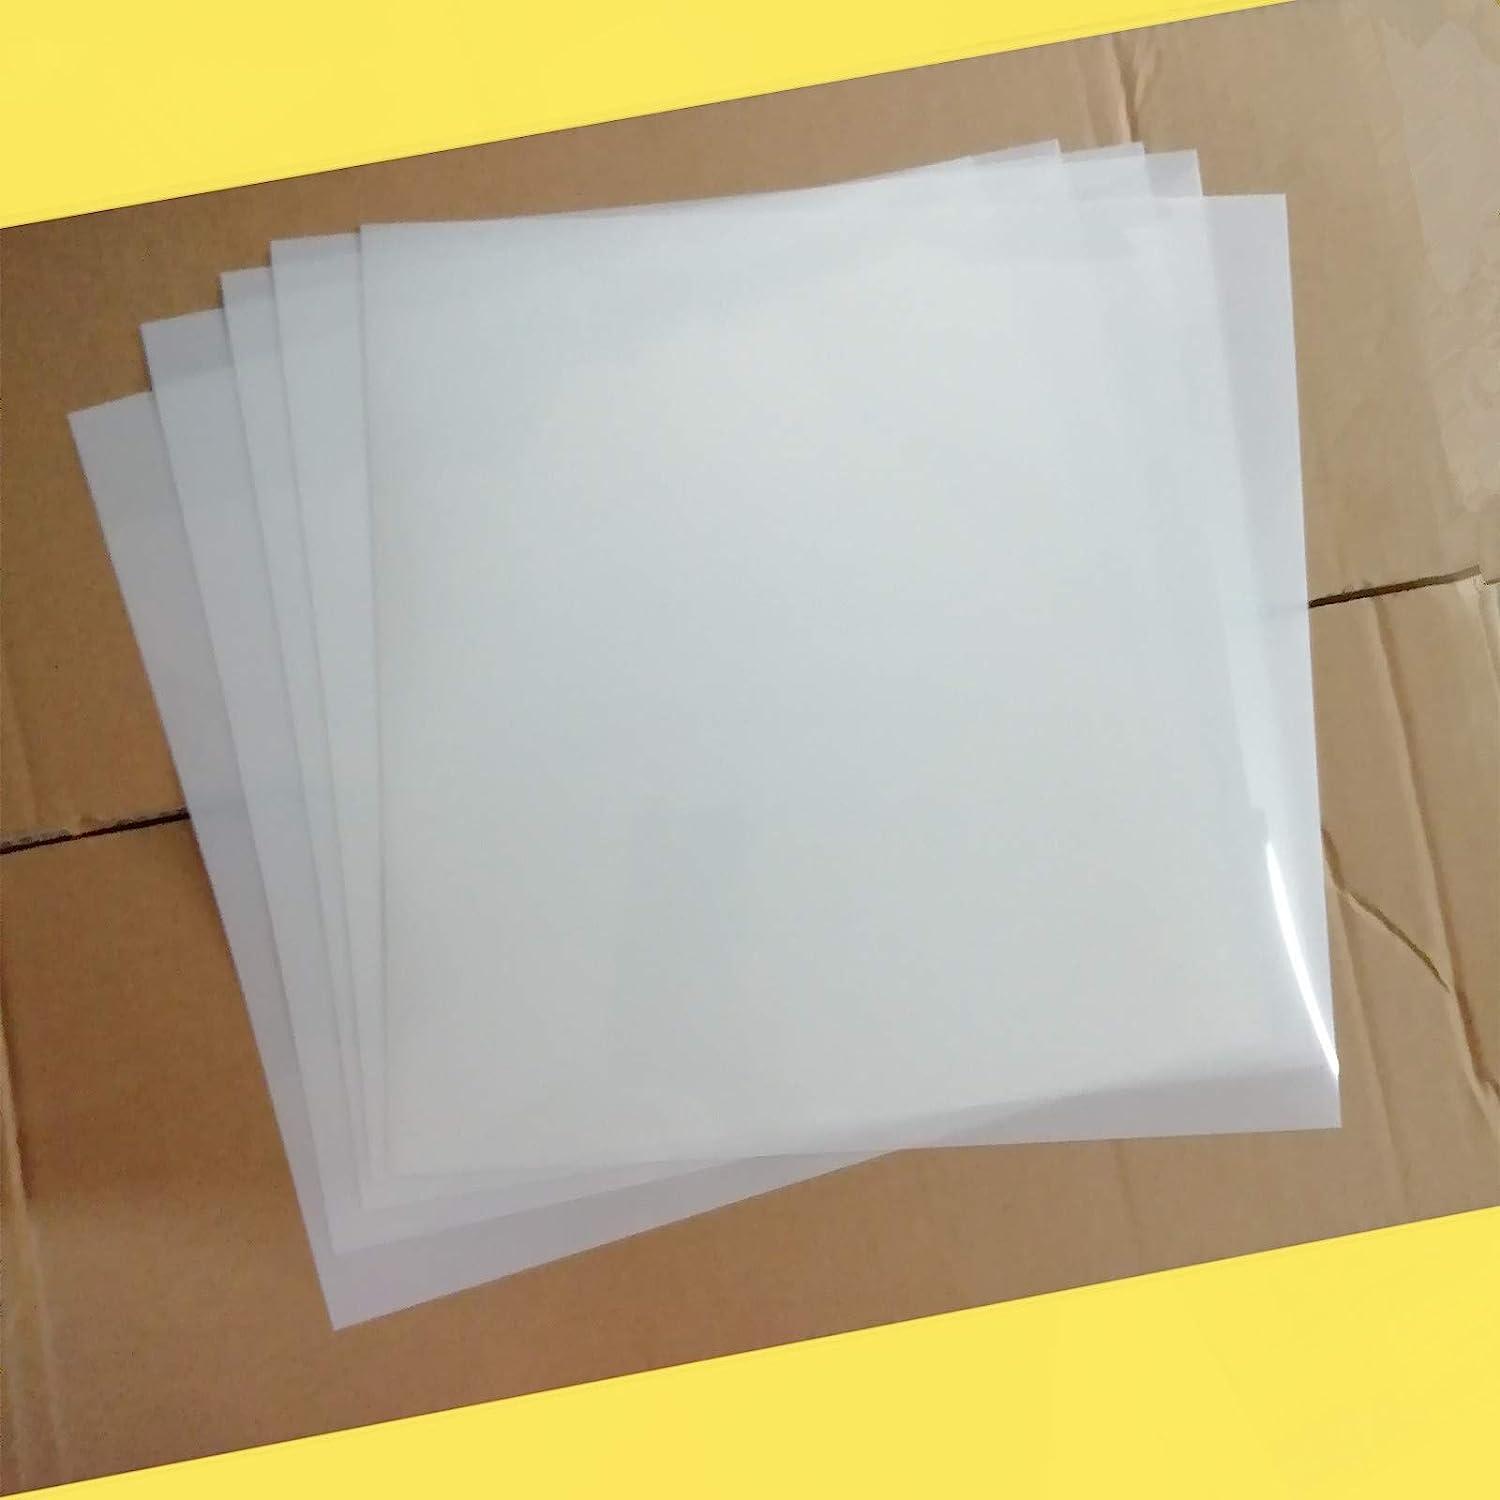 BANLTRE 12 Pieces 6 mil Blank Template Material Stencils Mylar for Cutting  Paper Clear Transparency Sheet 12 12 inch (12-6 mil)